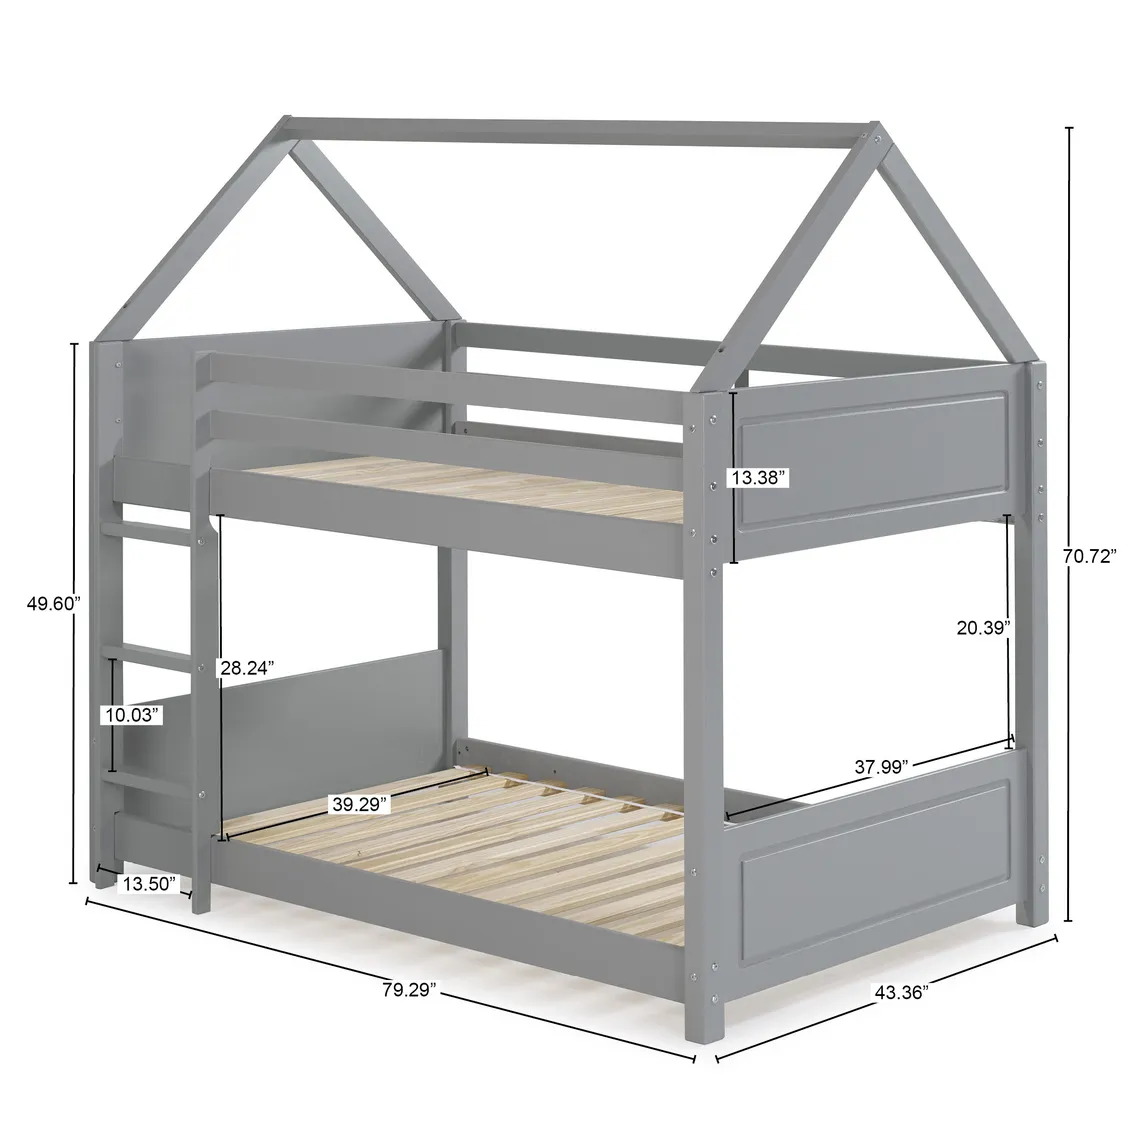 MAISON TWIN BUNK BED - GREY